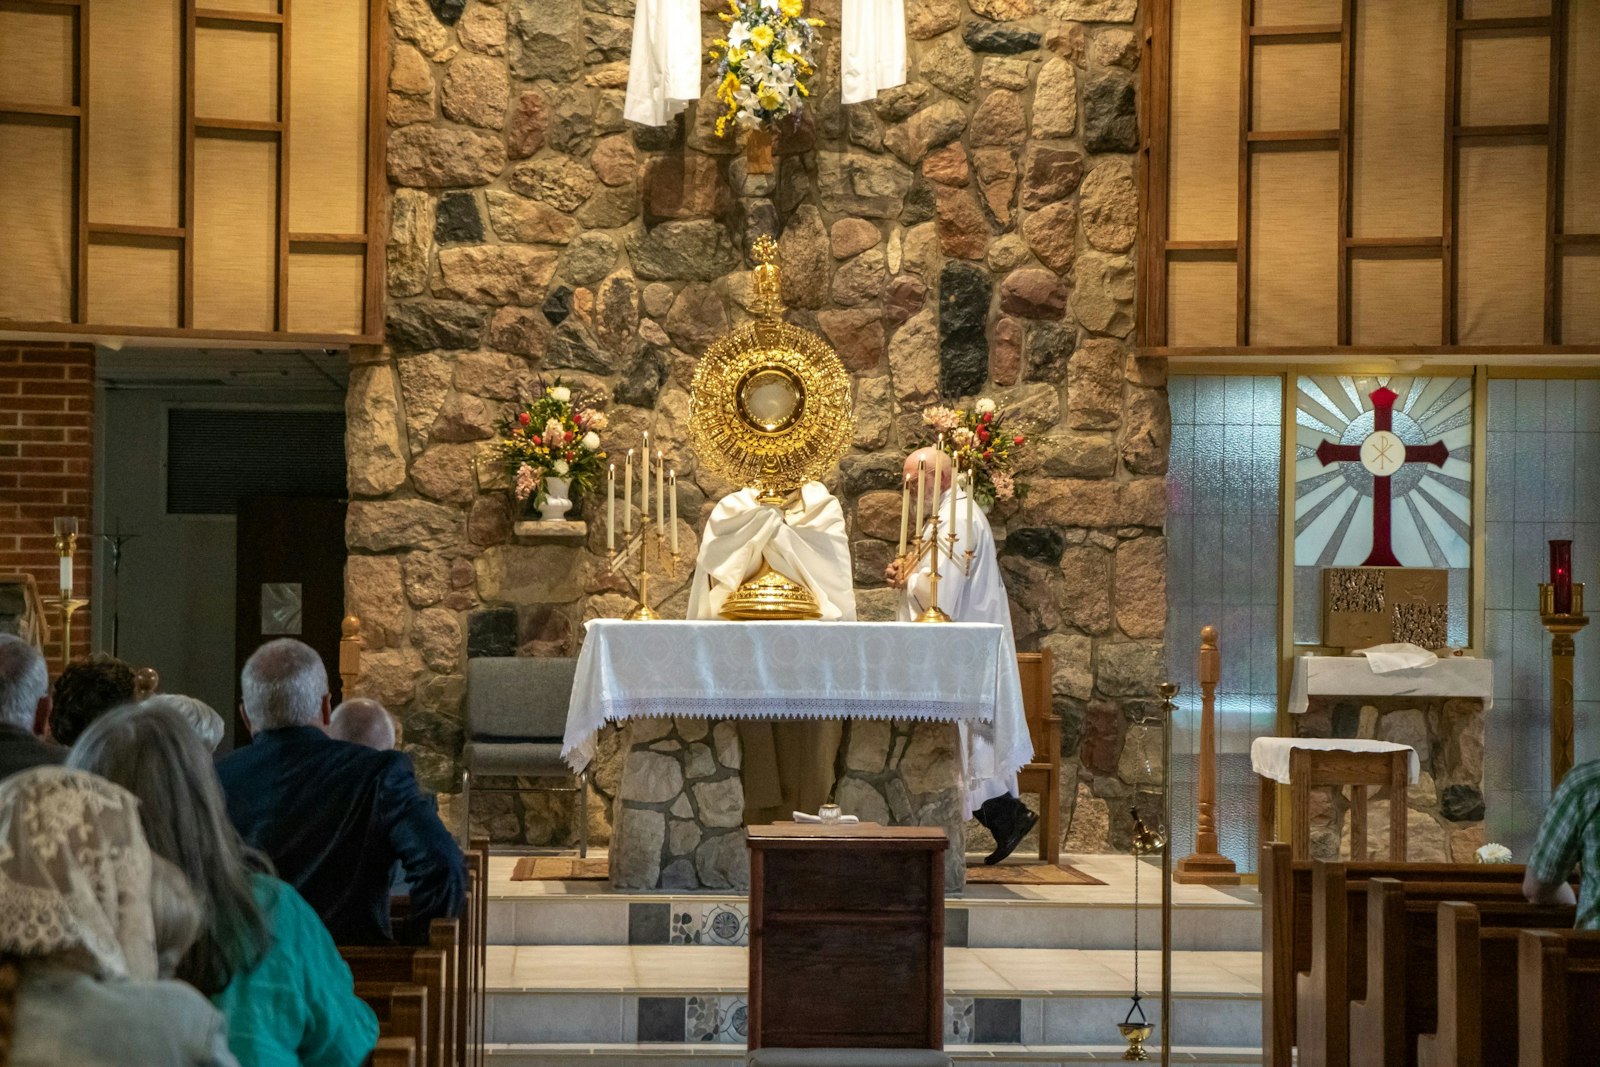 Fr. Sama Muma, associate pastor of SS. Peter and Paul Parish, elevates the monstrance to bless worshippers during the May 6 Eucharistic Revival. The five-foot-tall monstrance was commissioned as a gift for a priest in the Diocese of Toledo, who has offered to lend it to parishes in Michigan and Ohio for Eucharistic events.